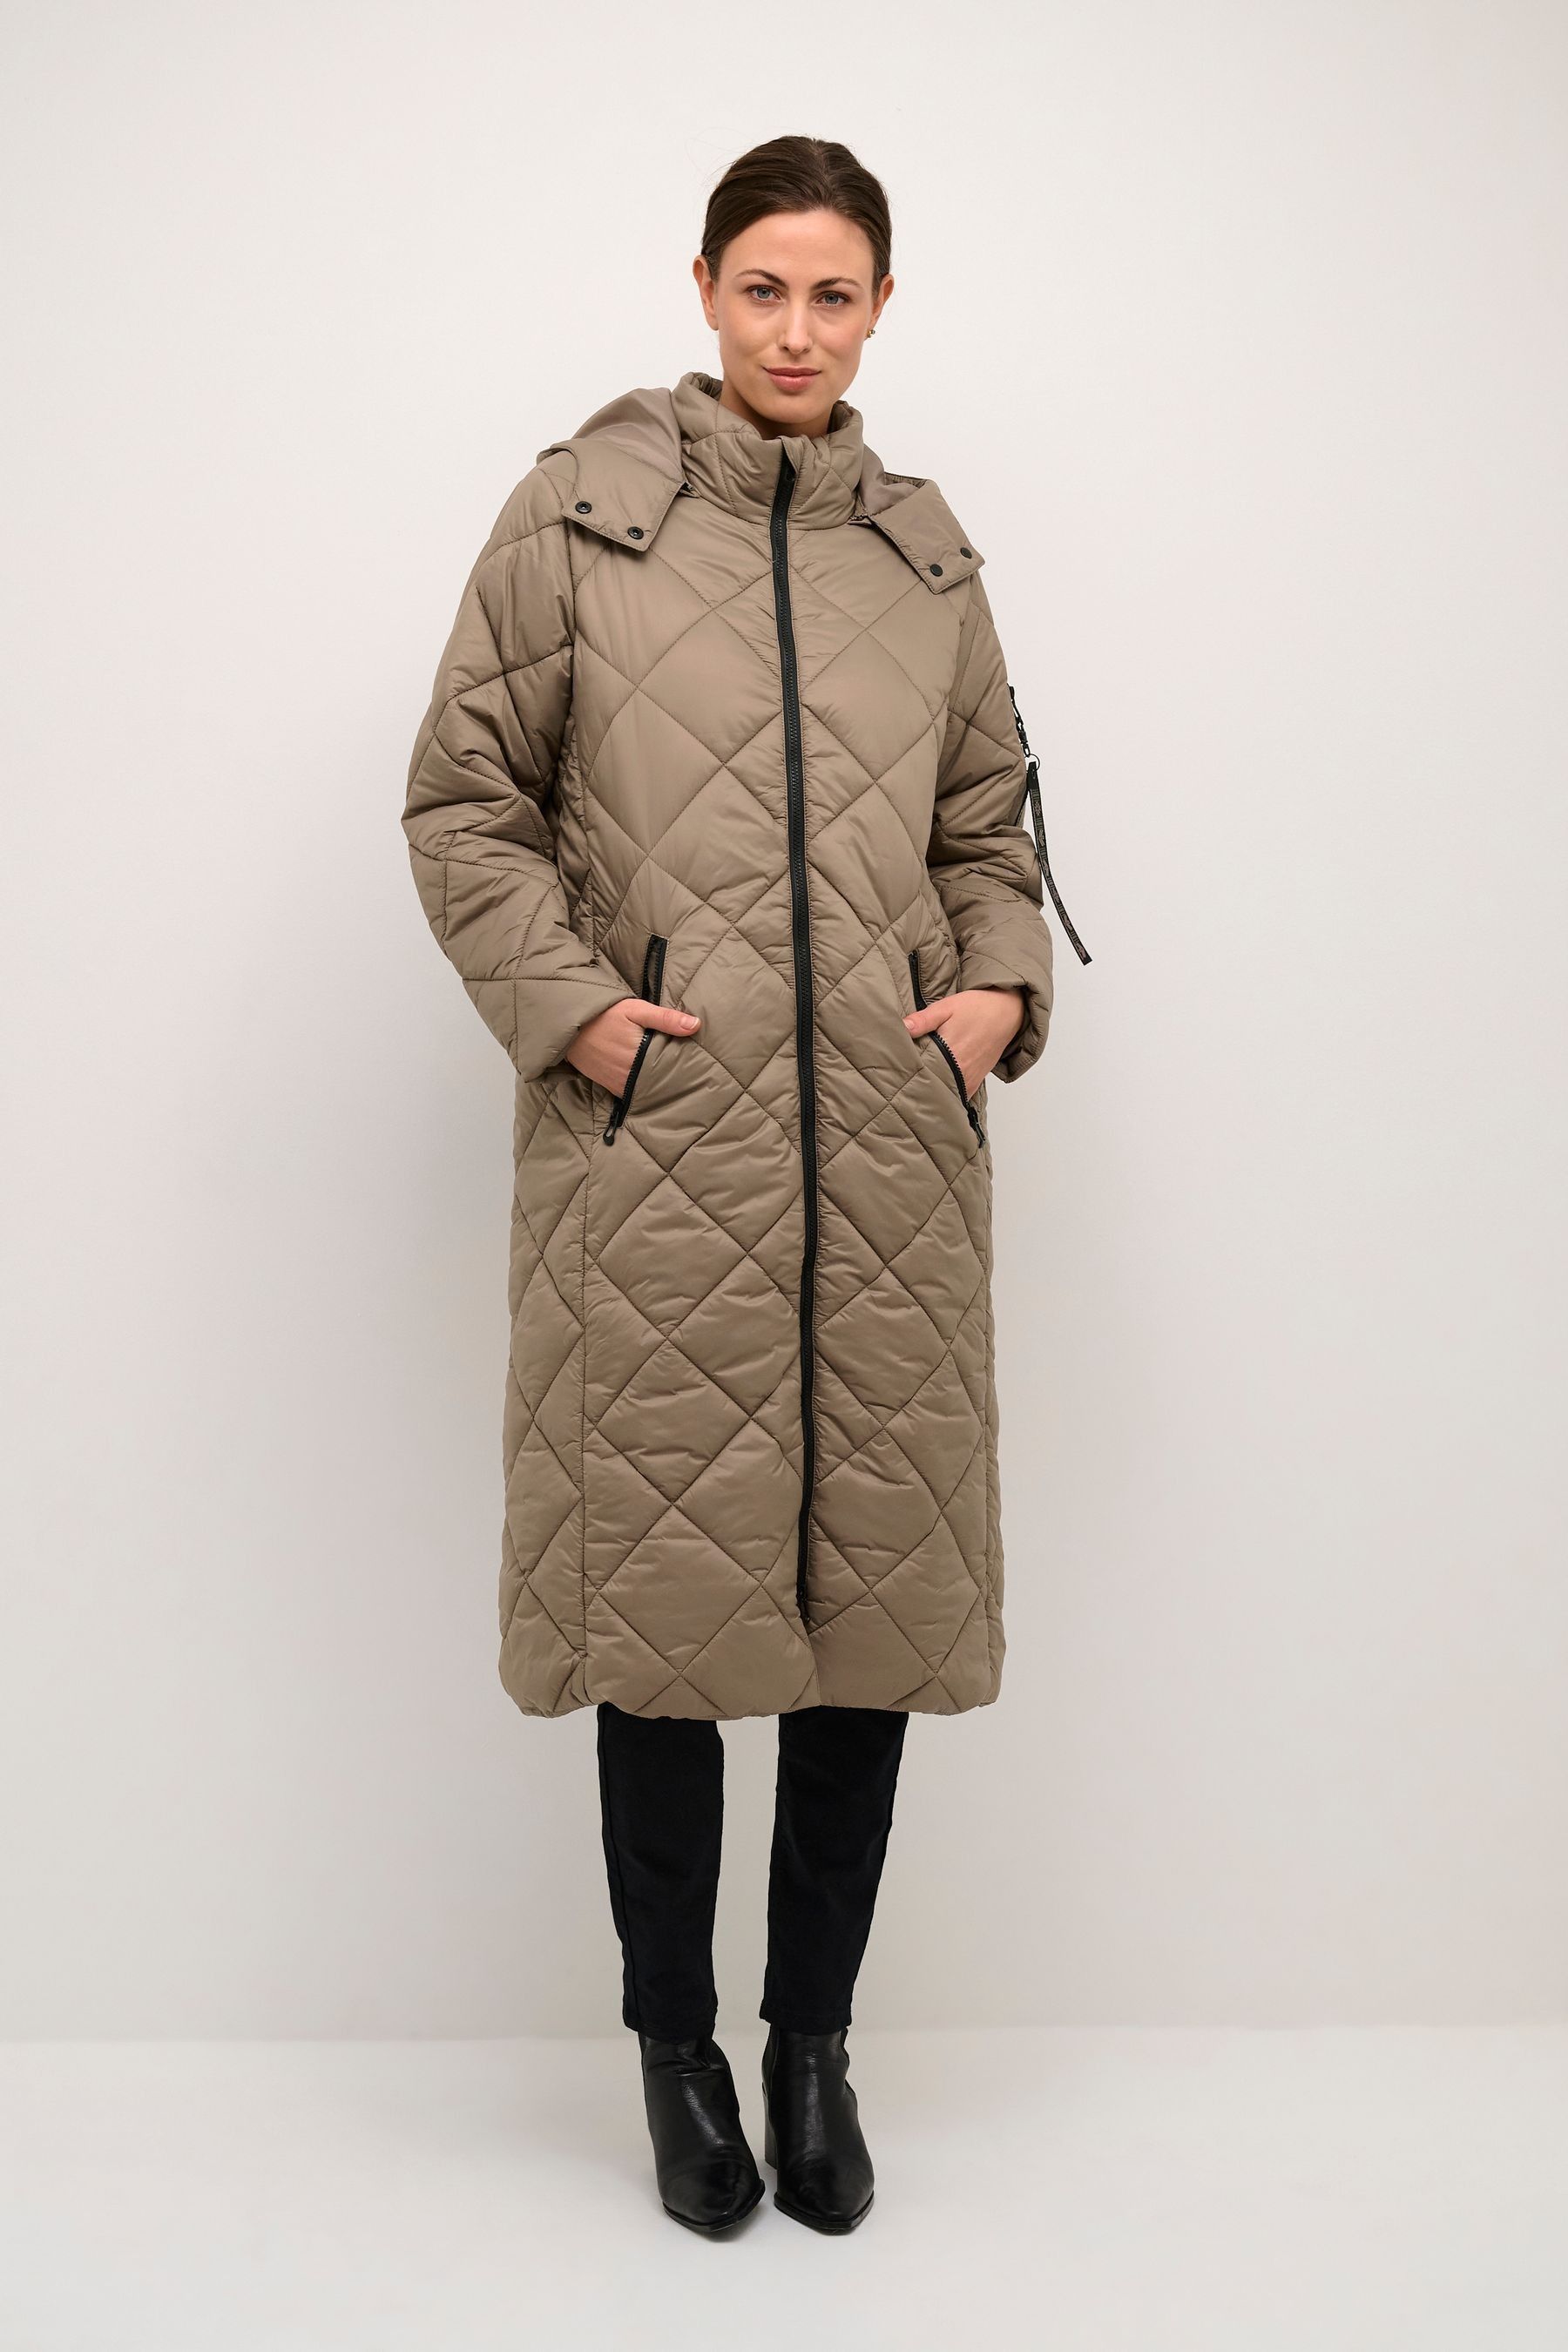 Buy Cream Gaiagro Padded Long Brown Jacket from the Next UK online shop